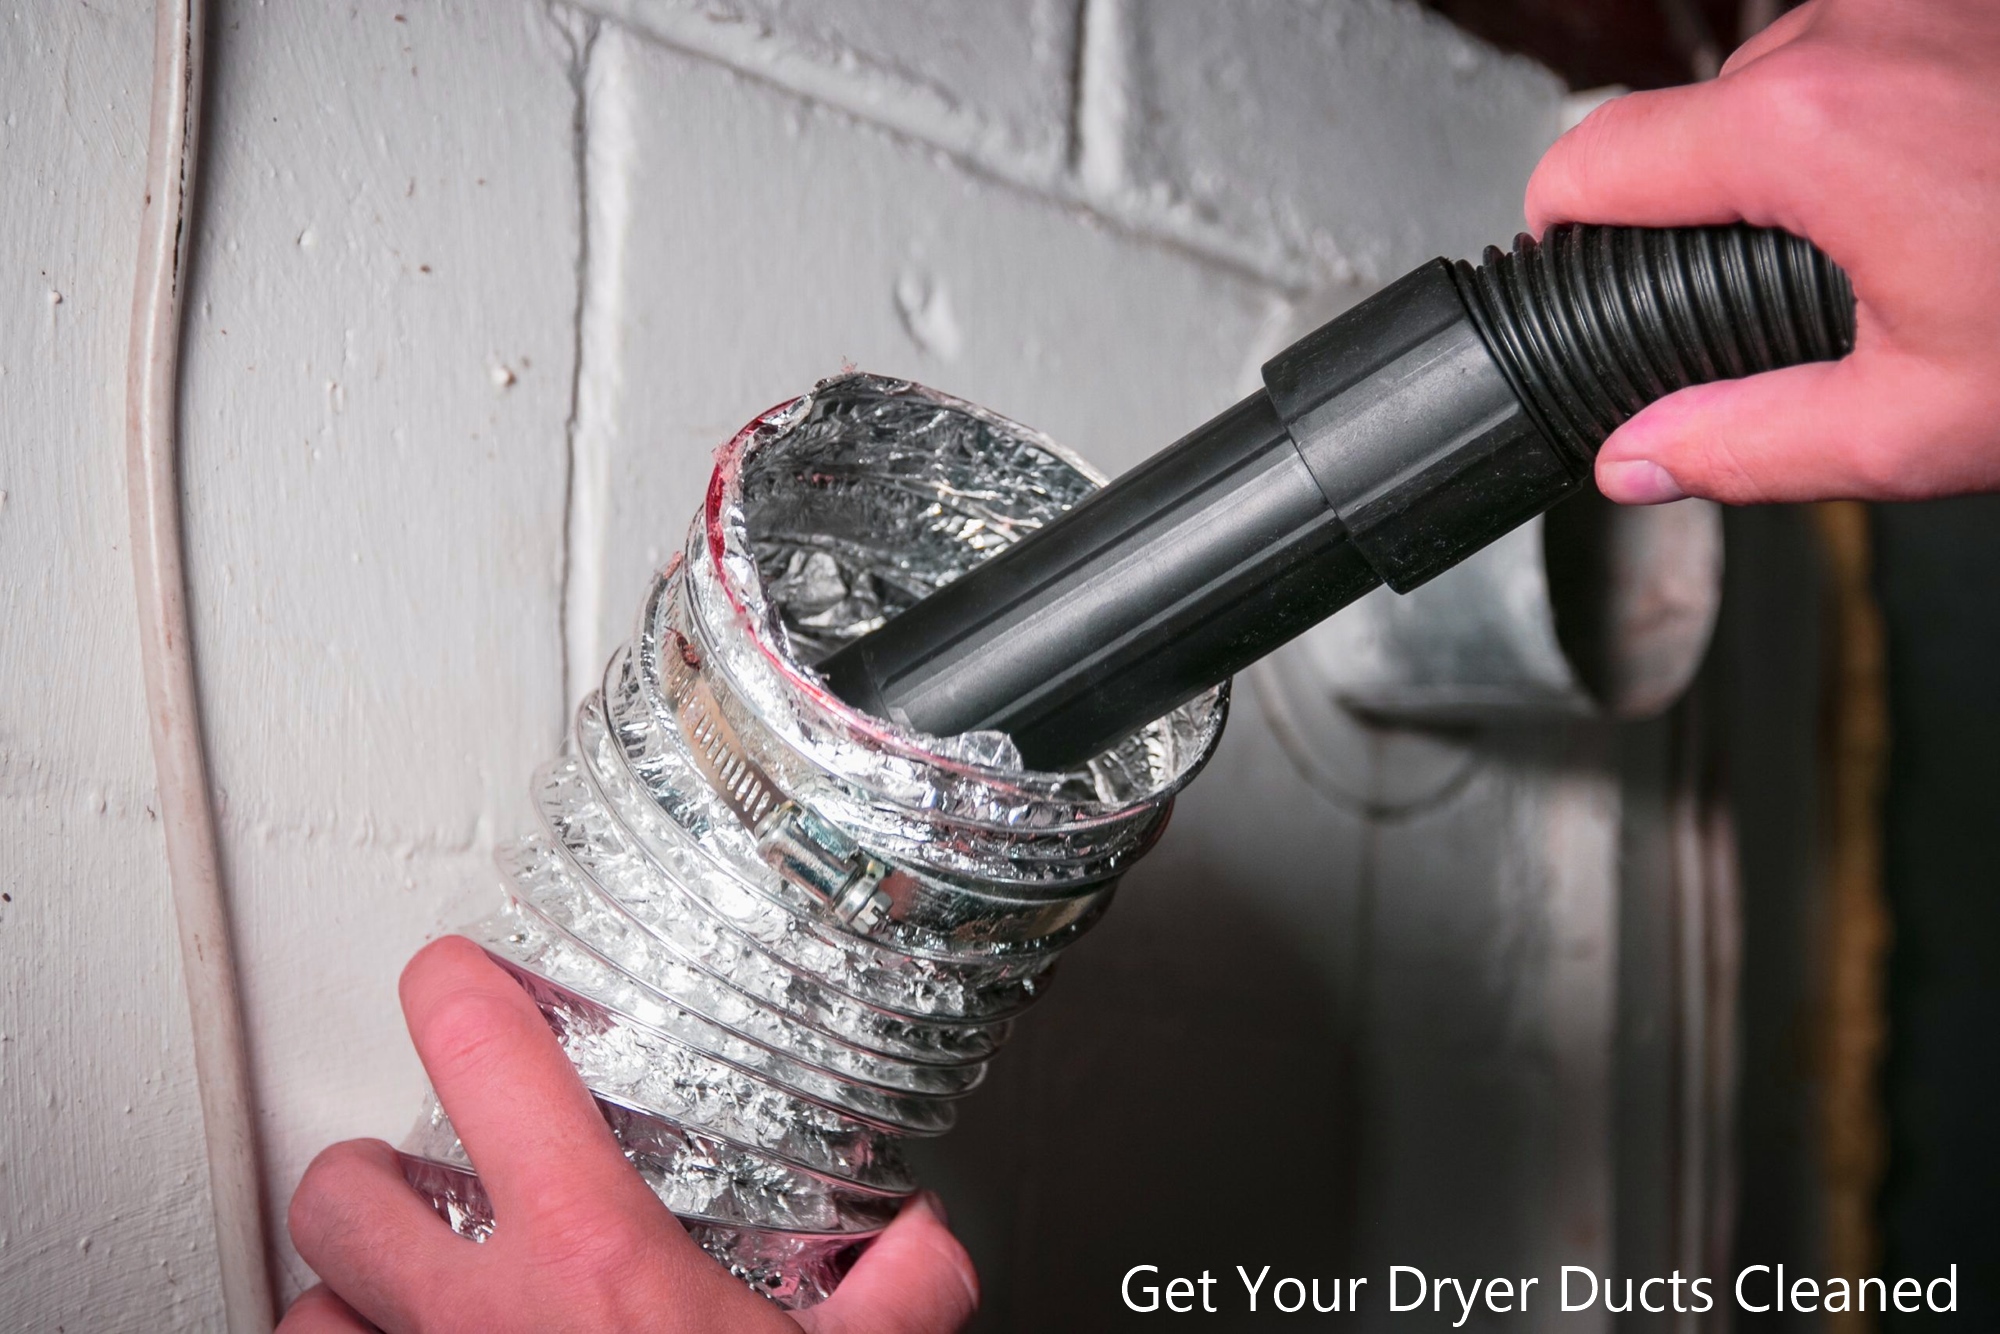 How Do You Know When It’s Time To Get Your Dryer Ducts Cleaned